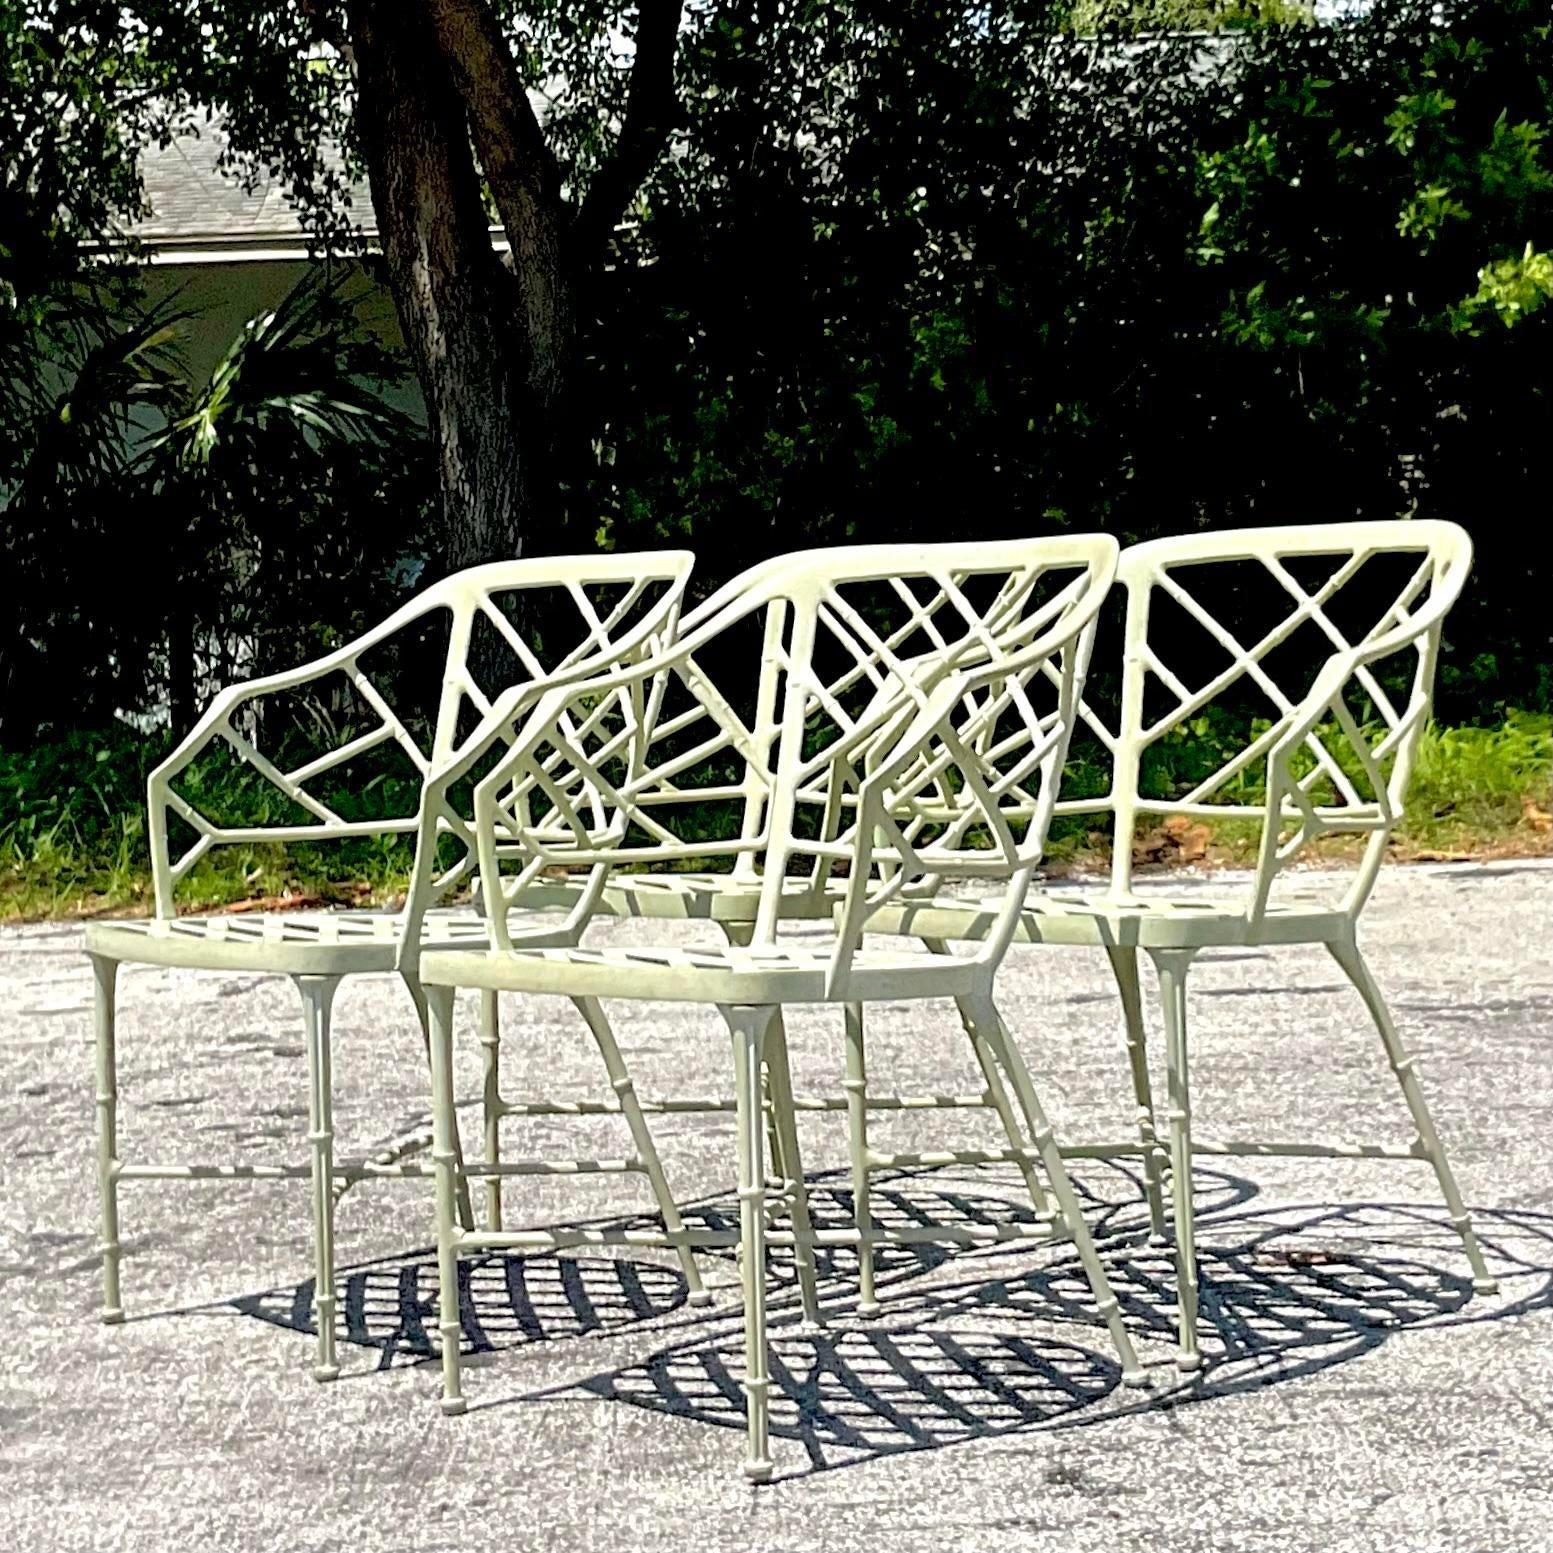 Aluminum Vintage Boho “Calcutta” Dining Chairs After Brown Jordan - Set of 4 For Sale